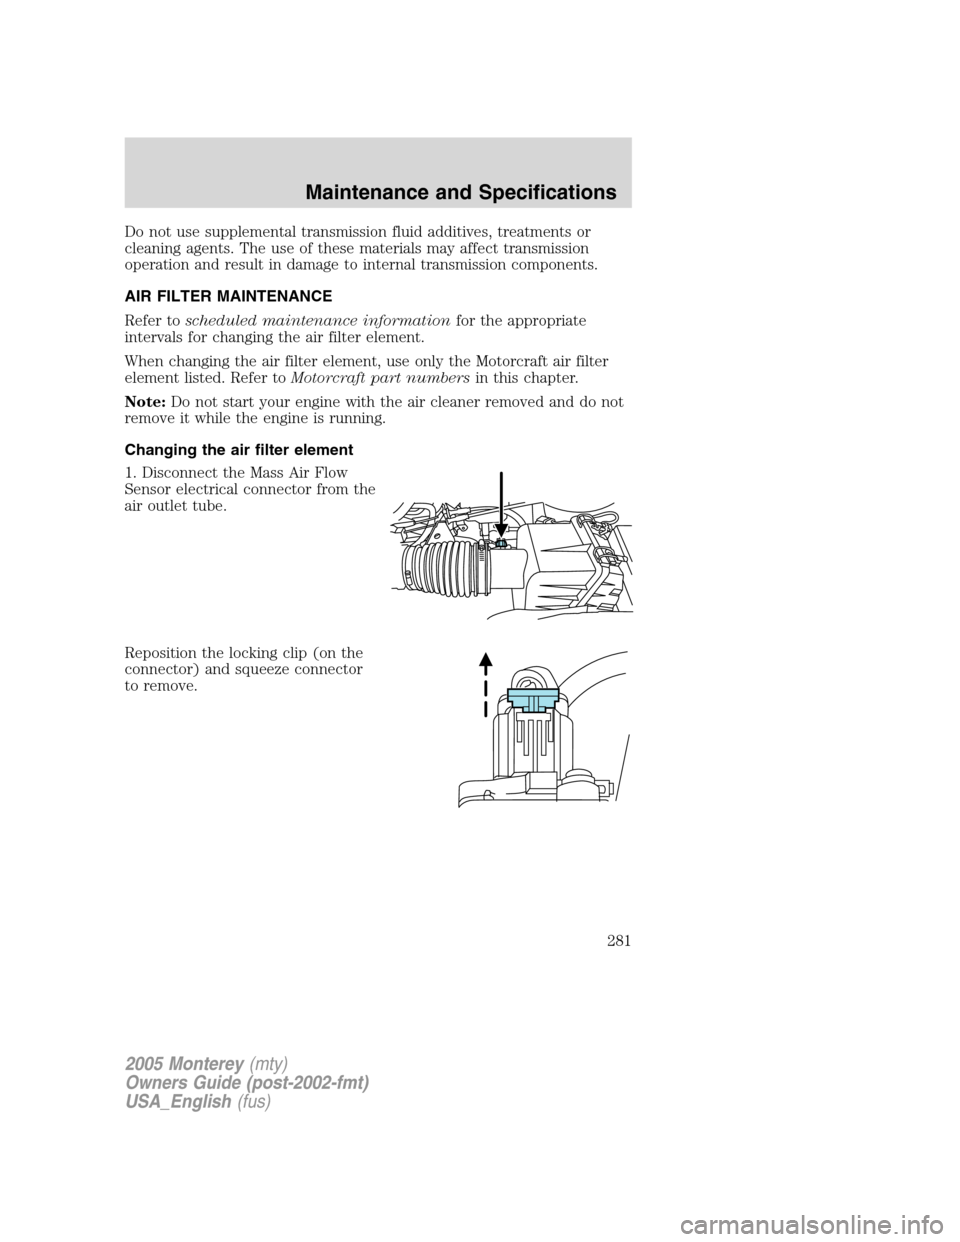 Mercury Monterey 2005  s Owners Guide Do not use supplemental transmission fluid additives, treatments or
cleaning agents. The use of these materials may affect transmission
operation and result in damage to internal transmission componen